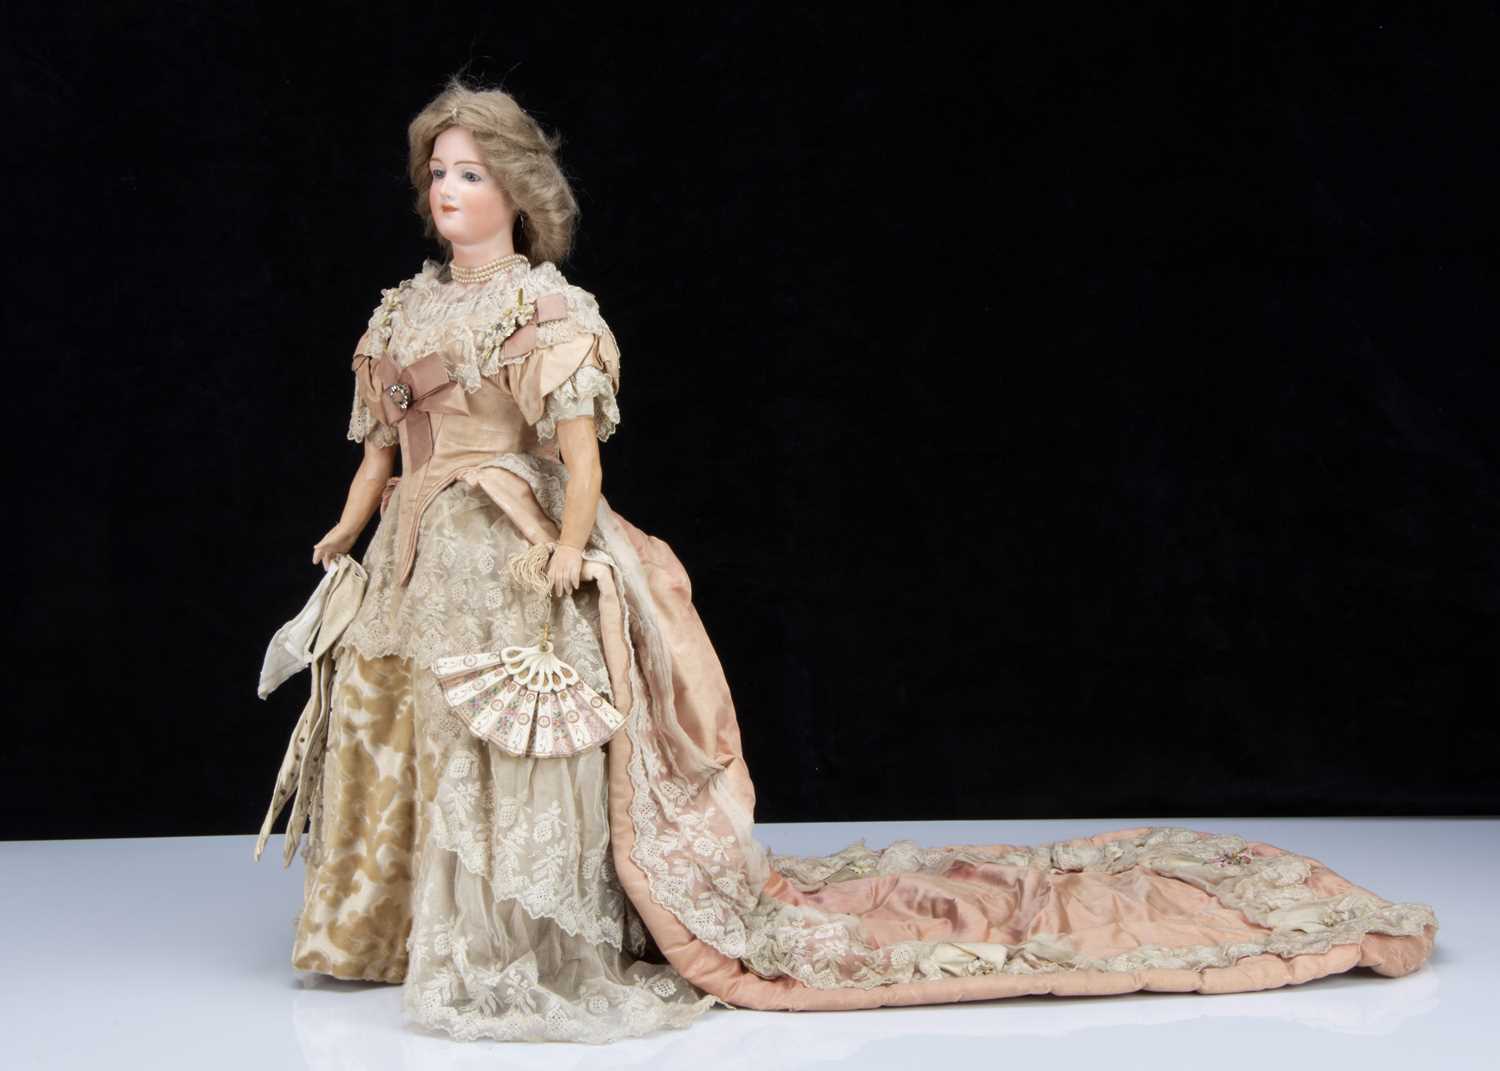 A fine Gebruder Heubach 7926 shoulder-head lady doll in late 19th century court dress, - Image 5 of 5